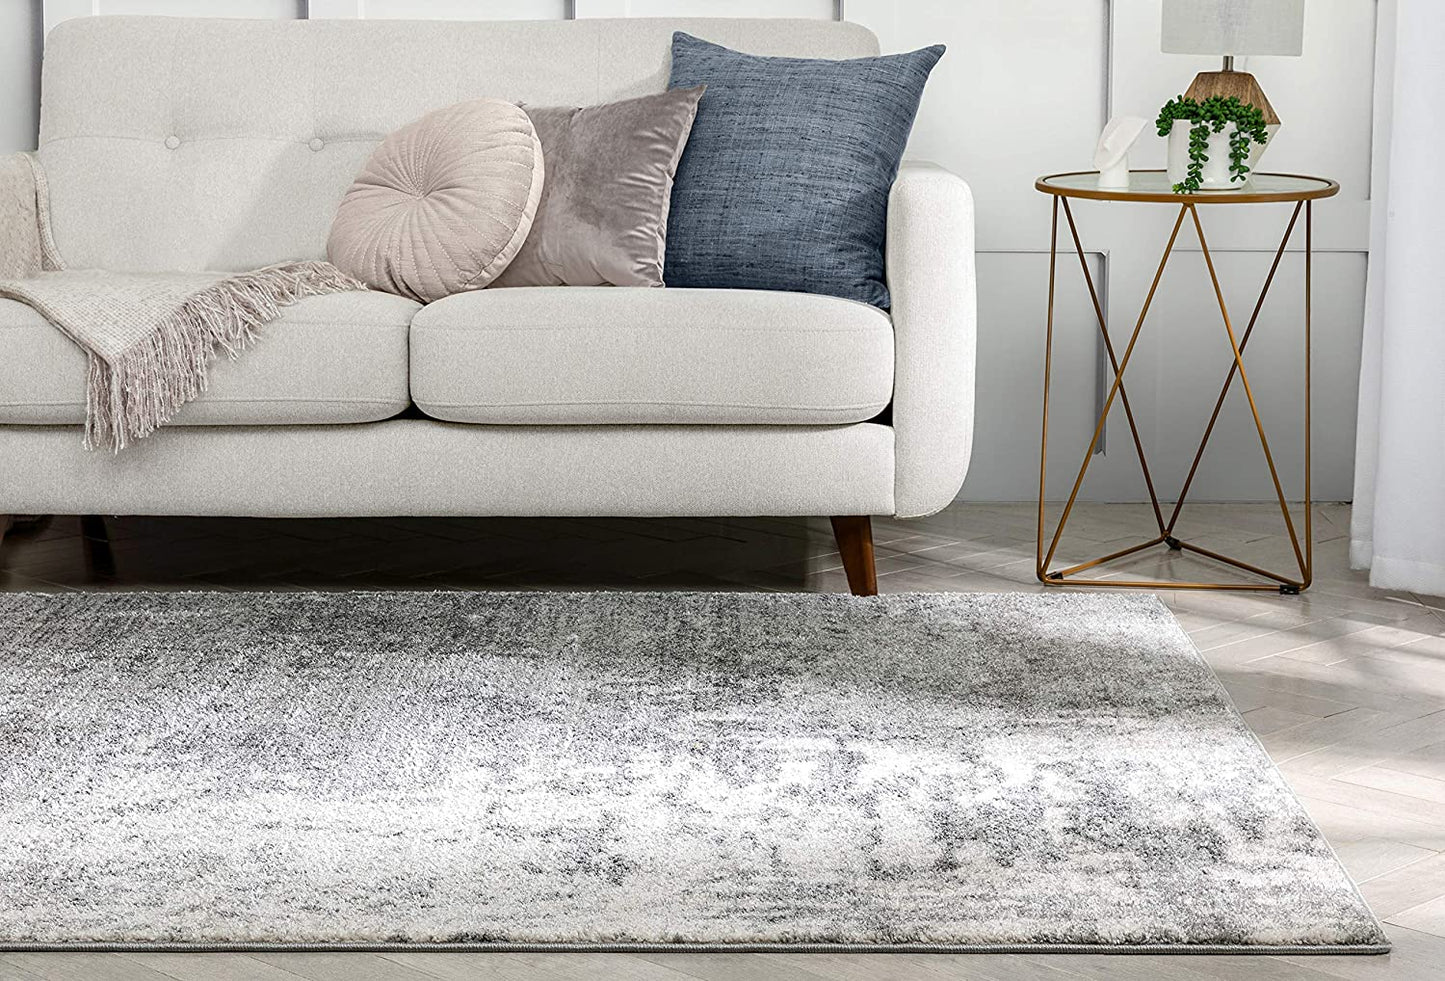 Motril Grey & Ivory Gradient Abstract Geometric Pattern Area Rug